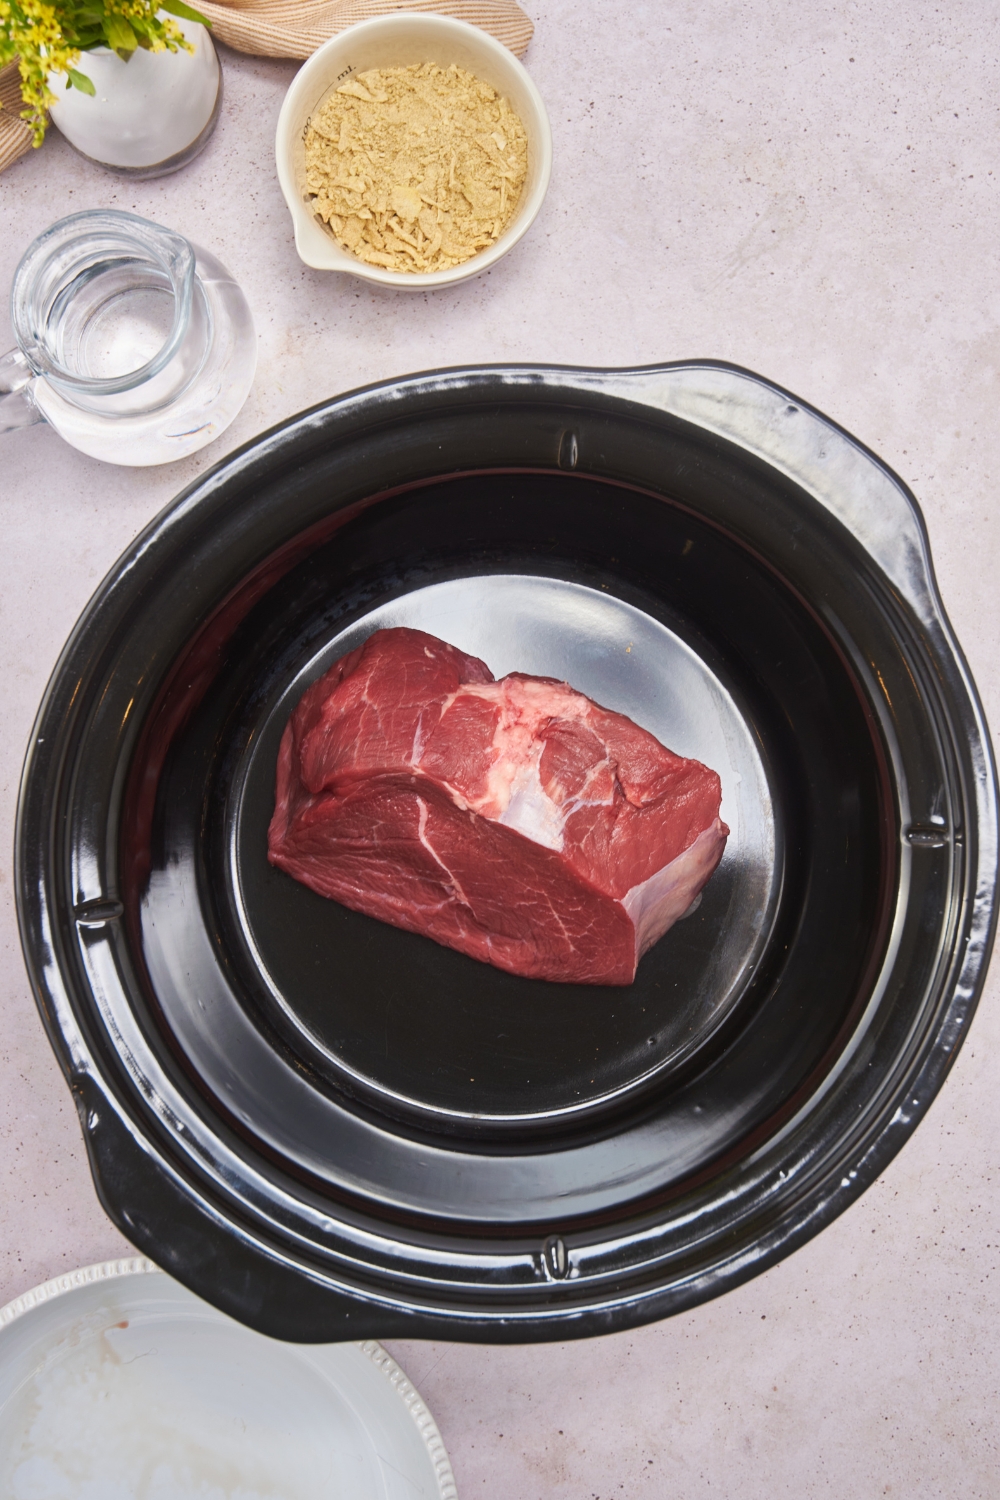 A crockpot with a raw beef roast in the bottom.